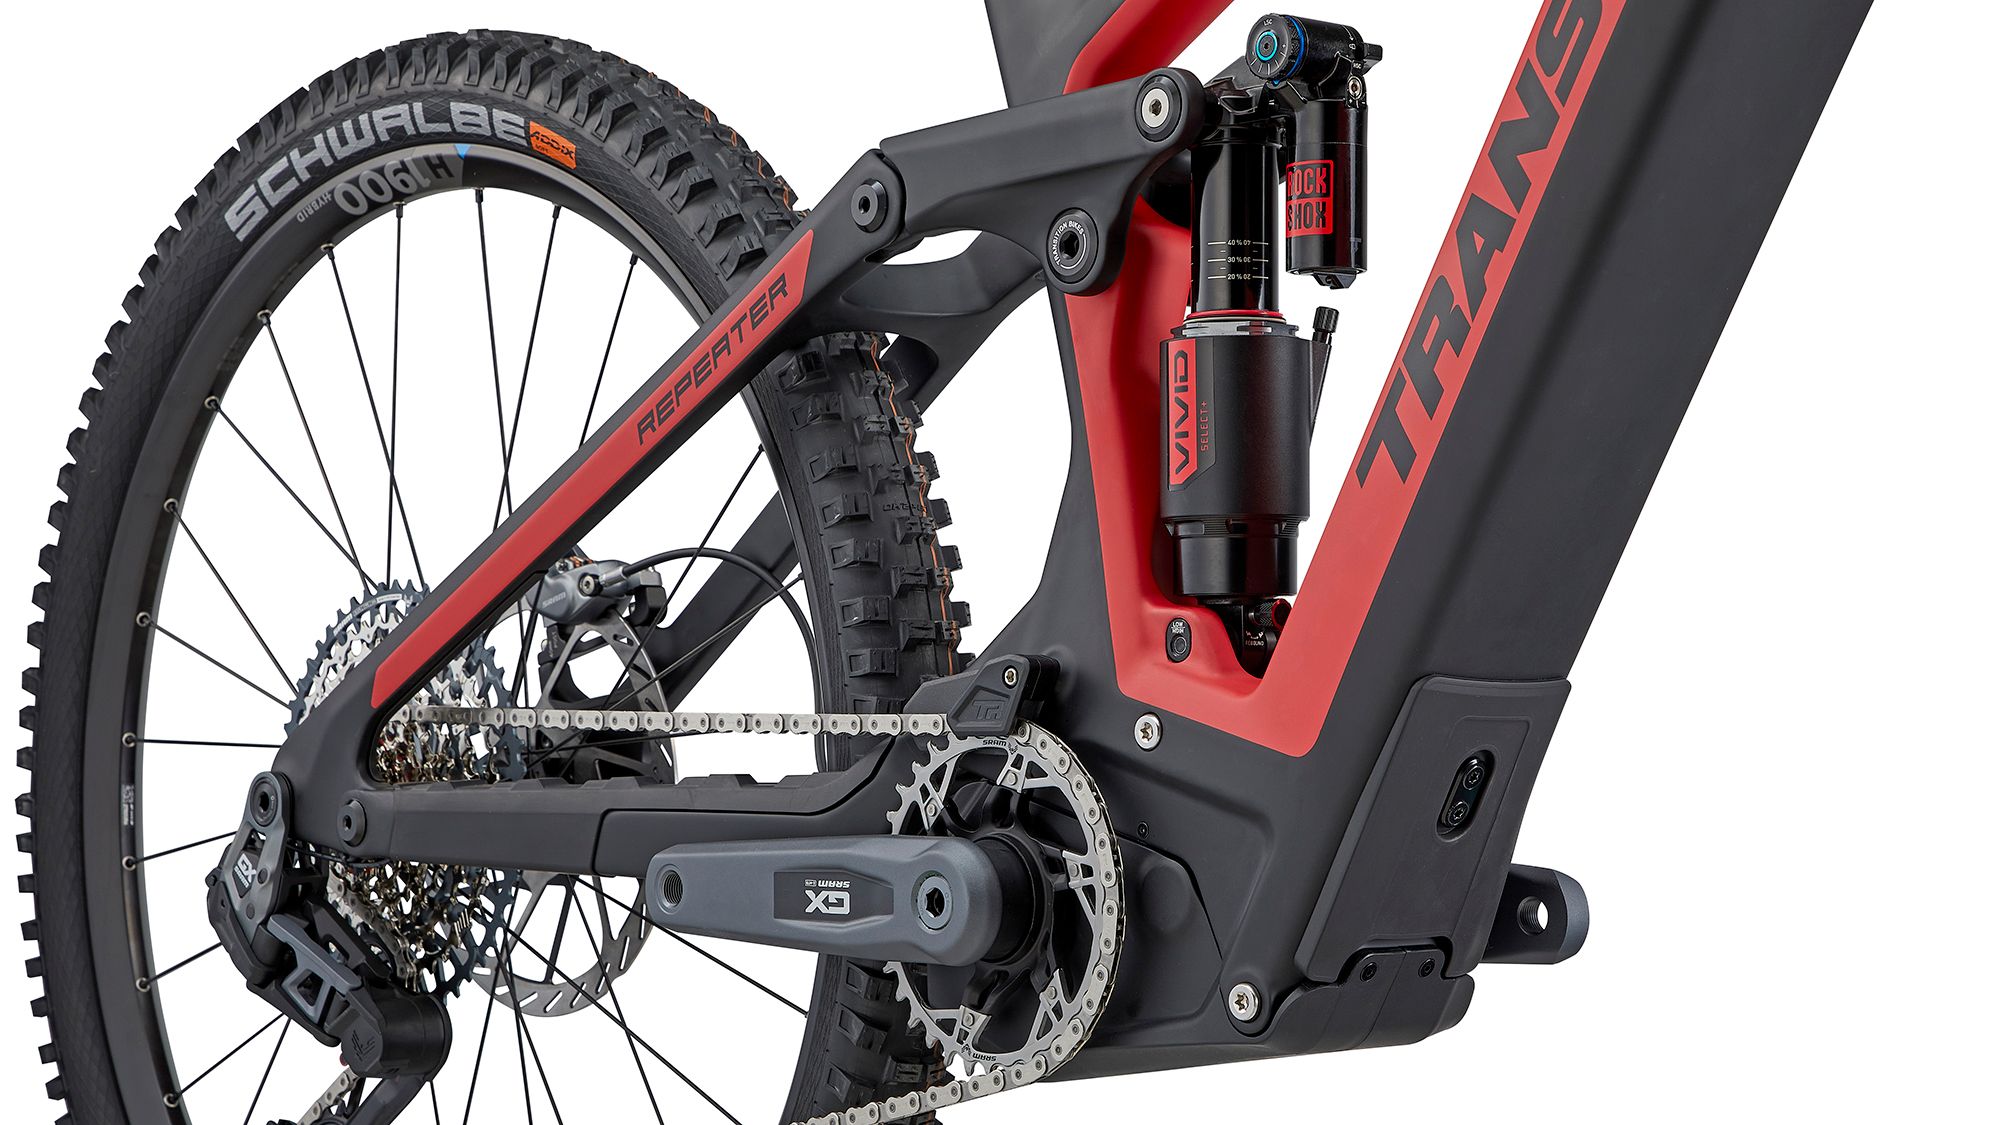 Made to shred - Transition Repeater Powertrain